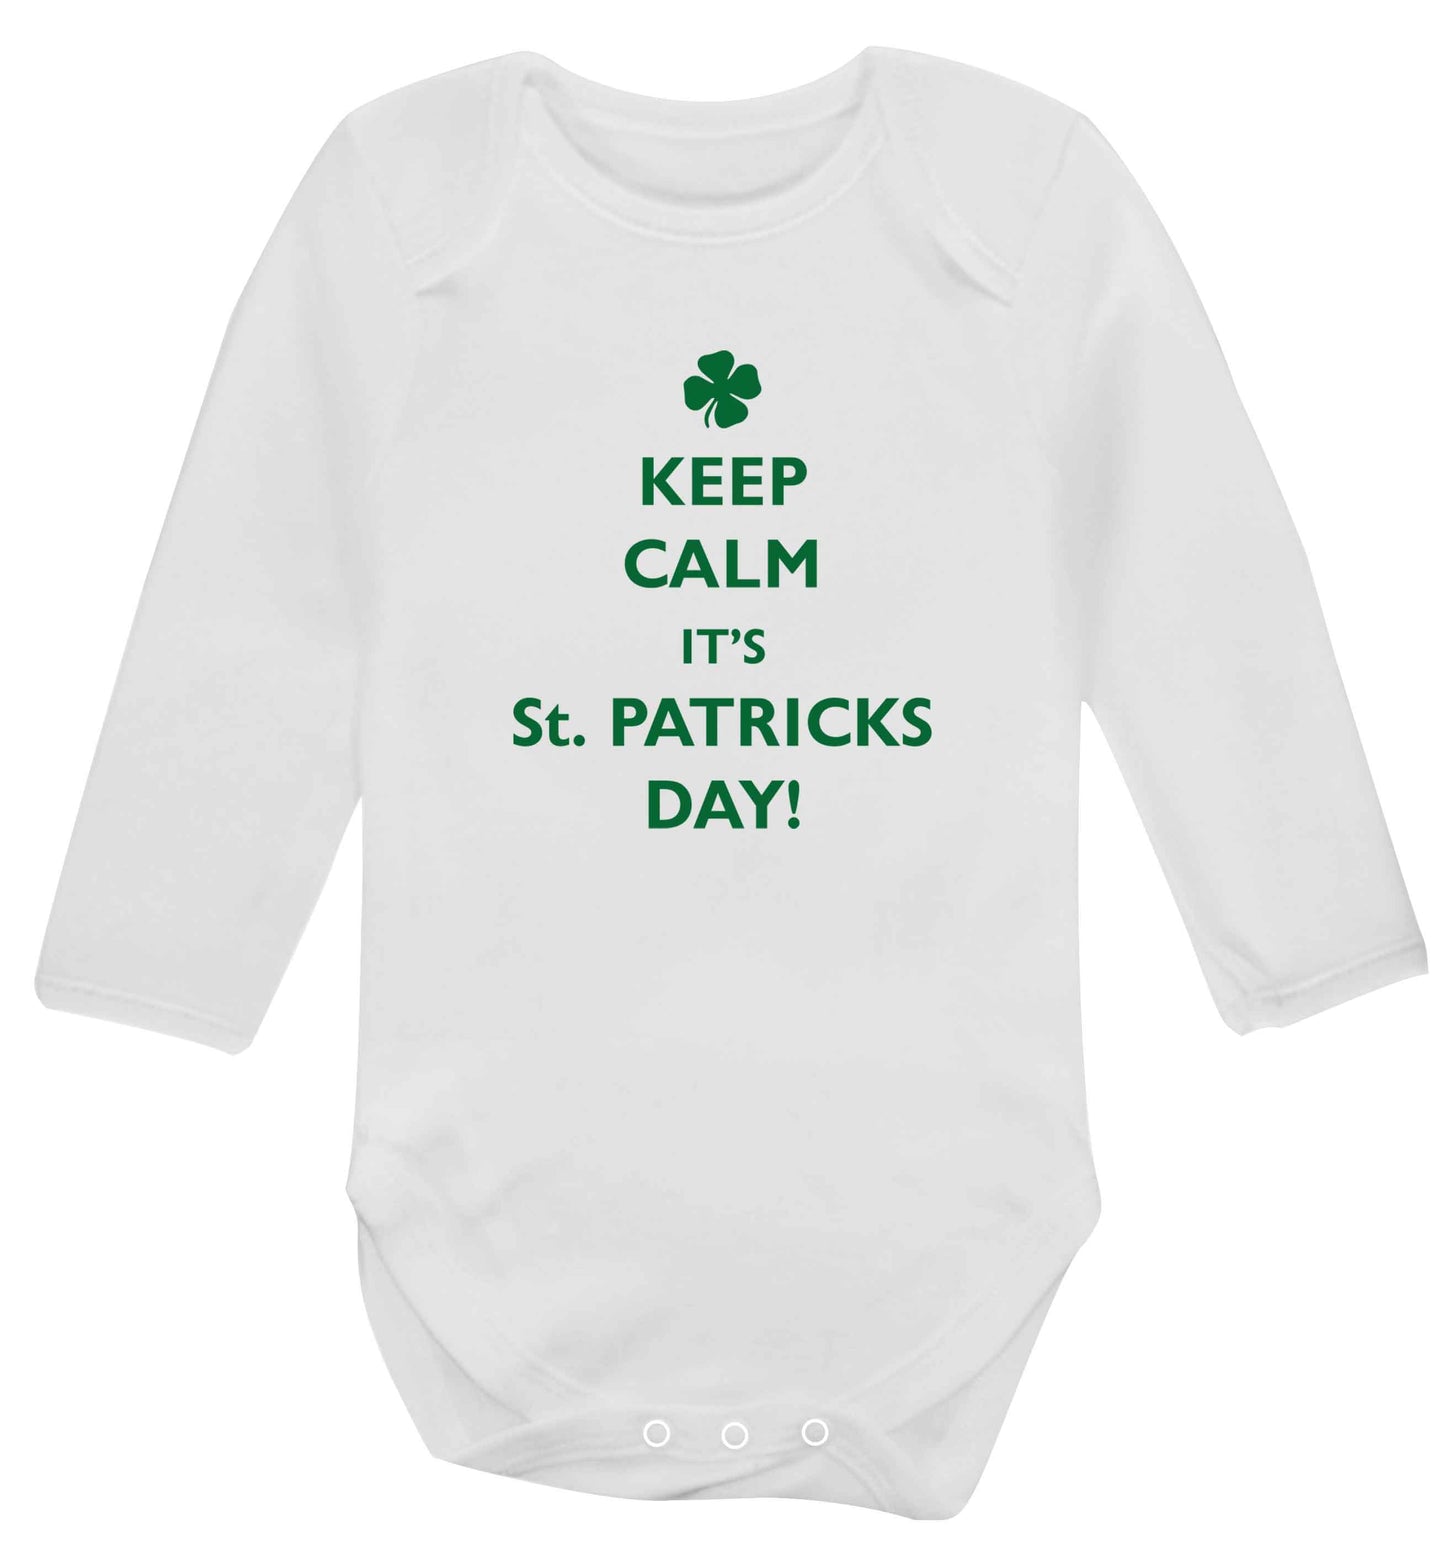 Keep calm it's St.Patricks day baby vest long sleeved white 6-12 months